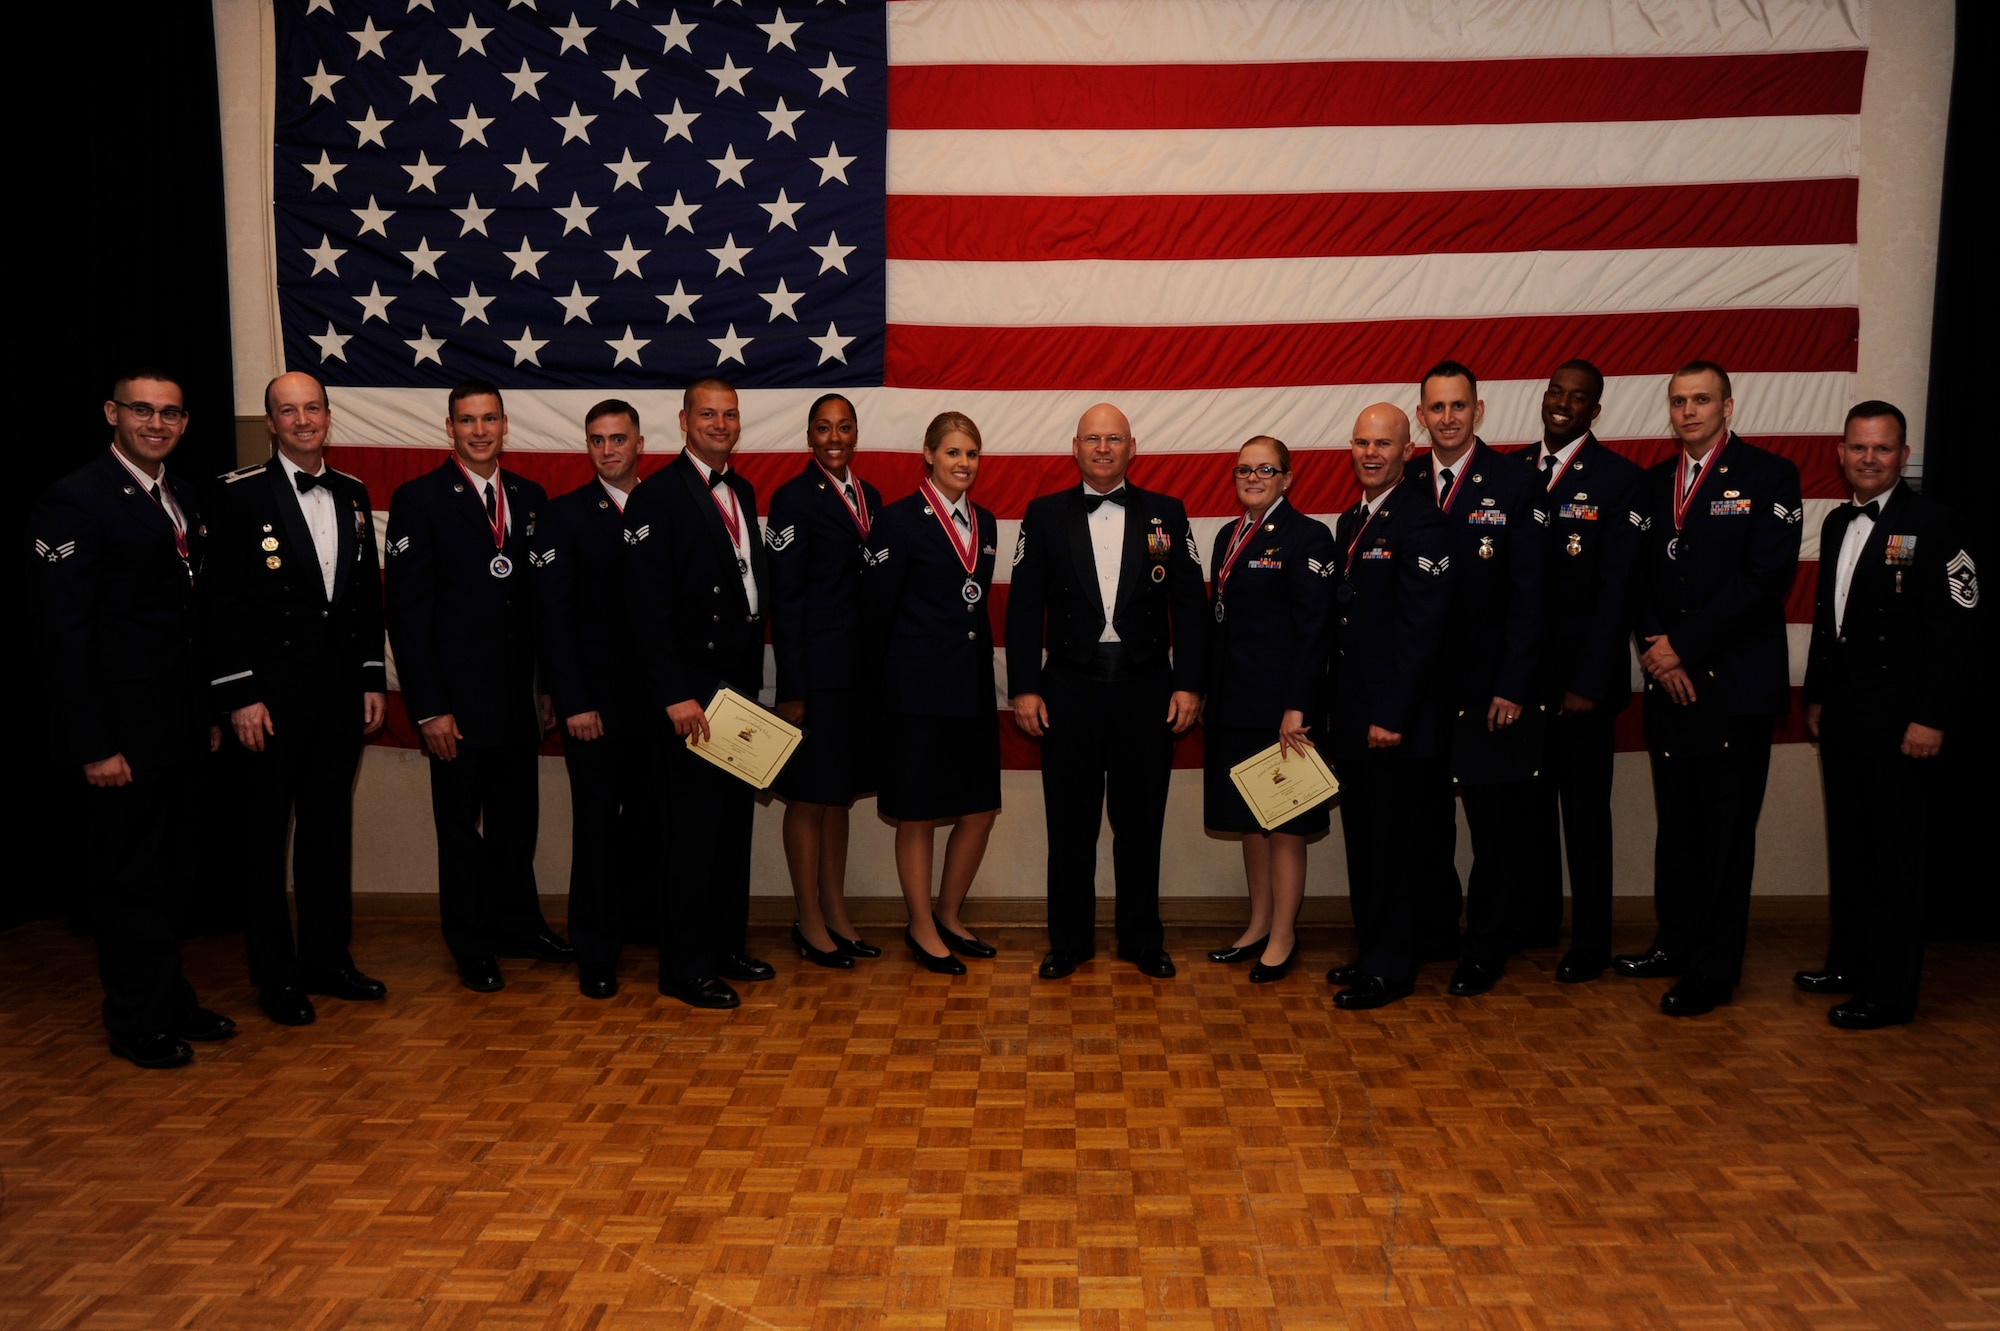 Members of Airman Leadership School, class 15-E, pose with members of base leadership after an ALS graduation, June 15, 2015, Vandenberg Air Force Base, Calif. The 12 students spent five weeks learning Air Force supervisory basics. (U.S. Air Force photo by Airman 1st Class Robert J. Volio /Released)